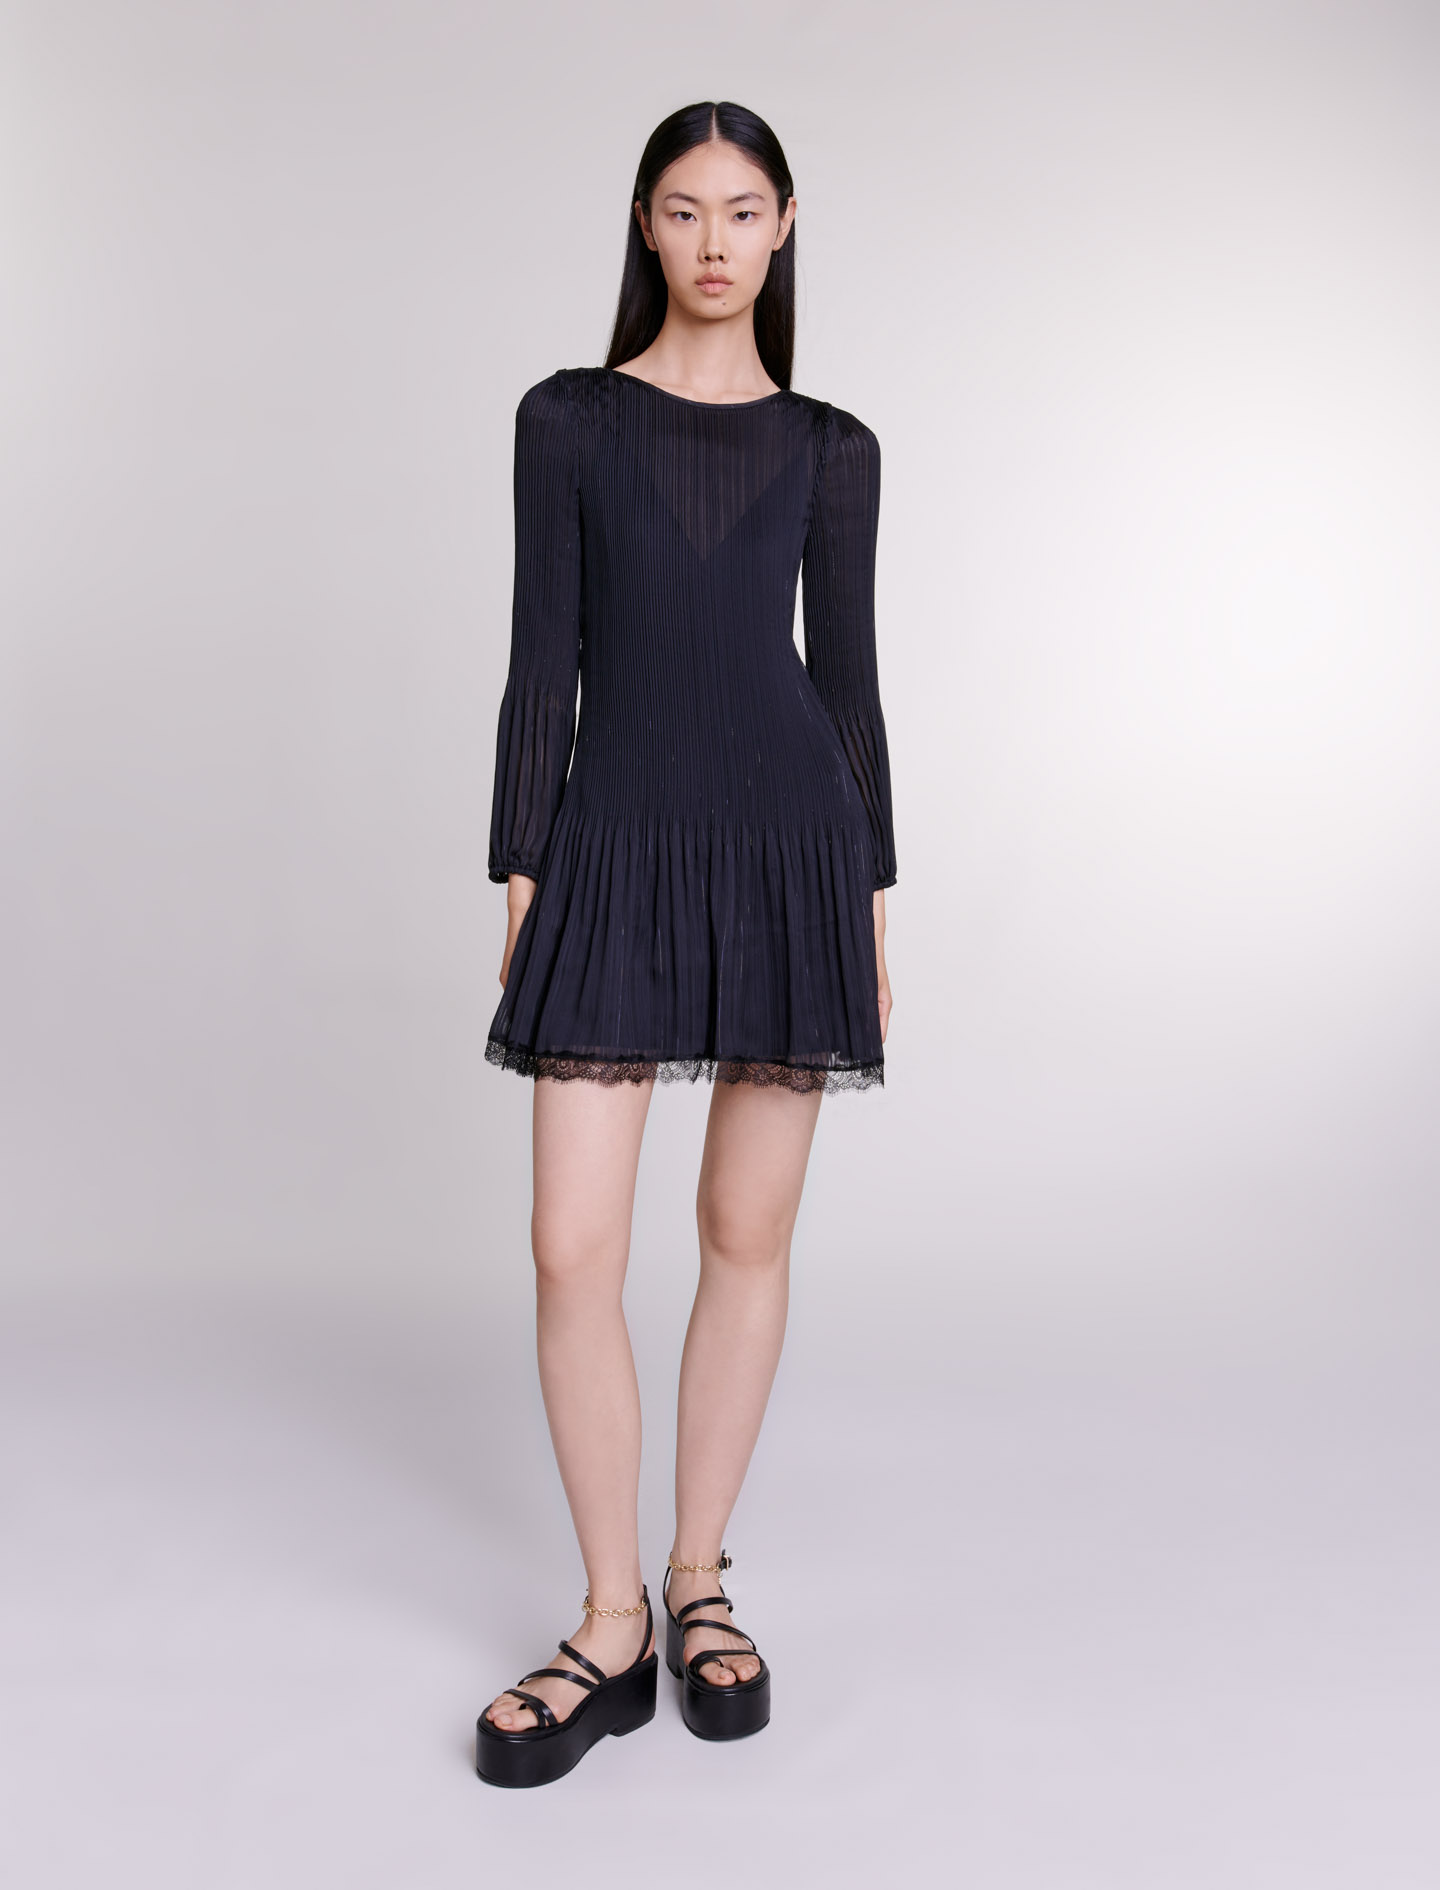 Maje Woman's polyester Lining: Short pleated dress for Spring/Summer, in color Black / Black